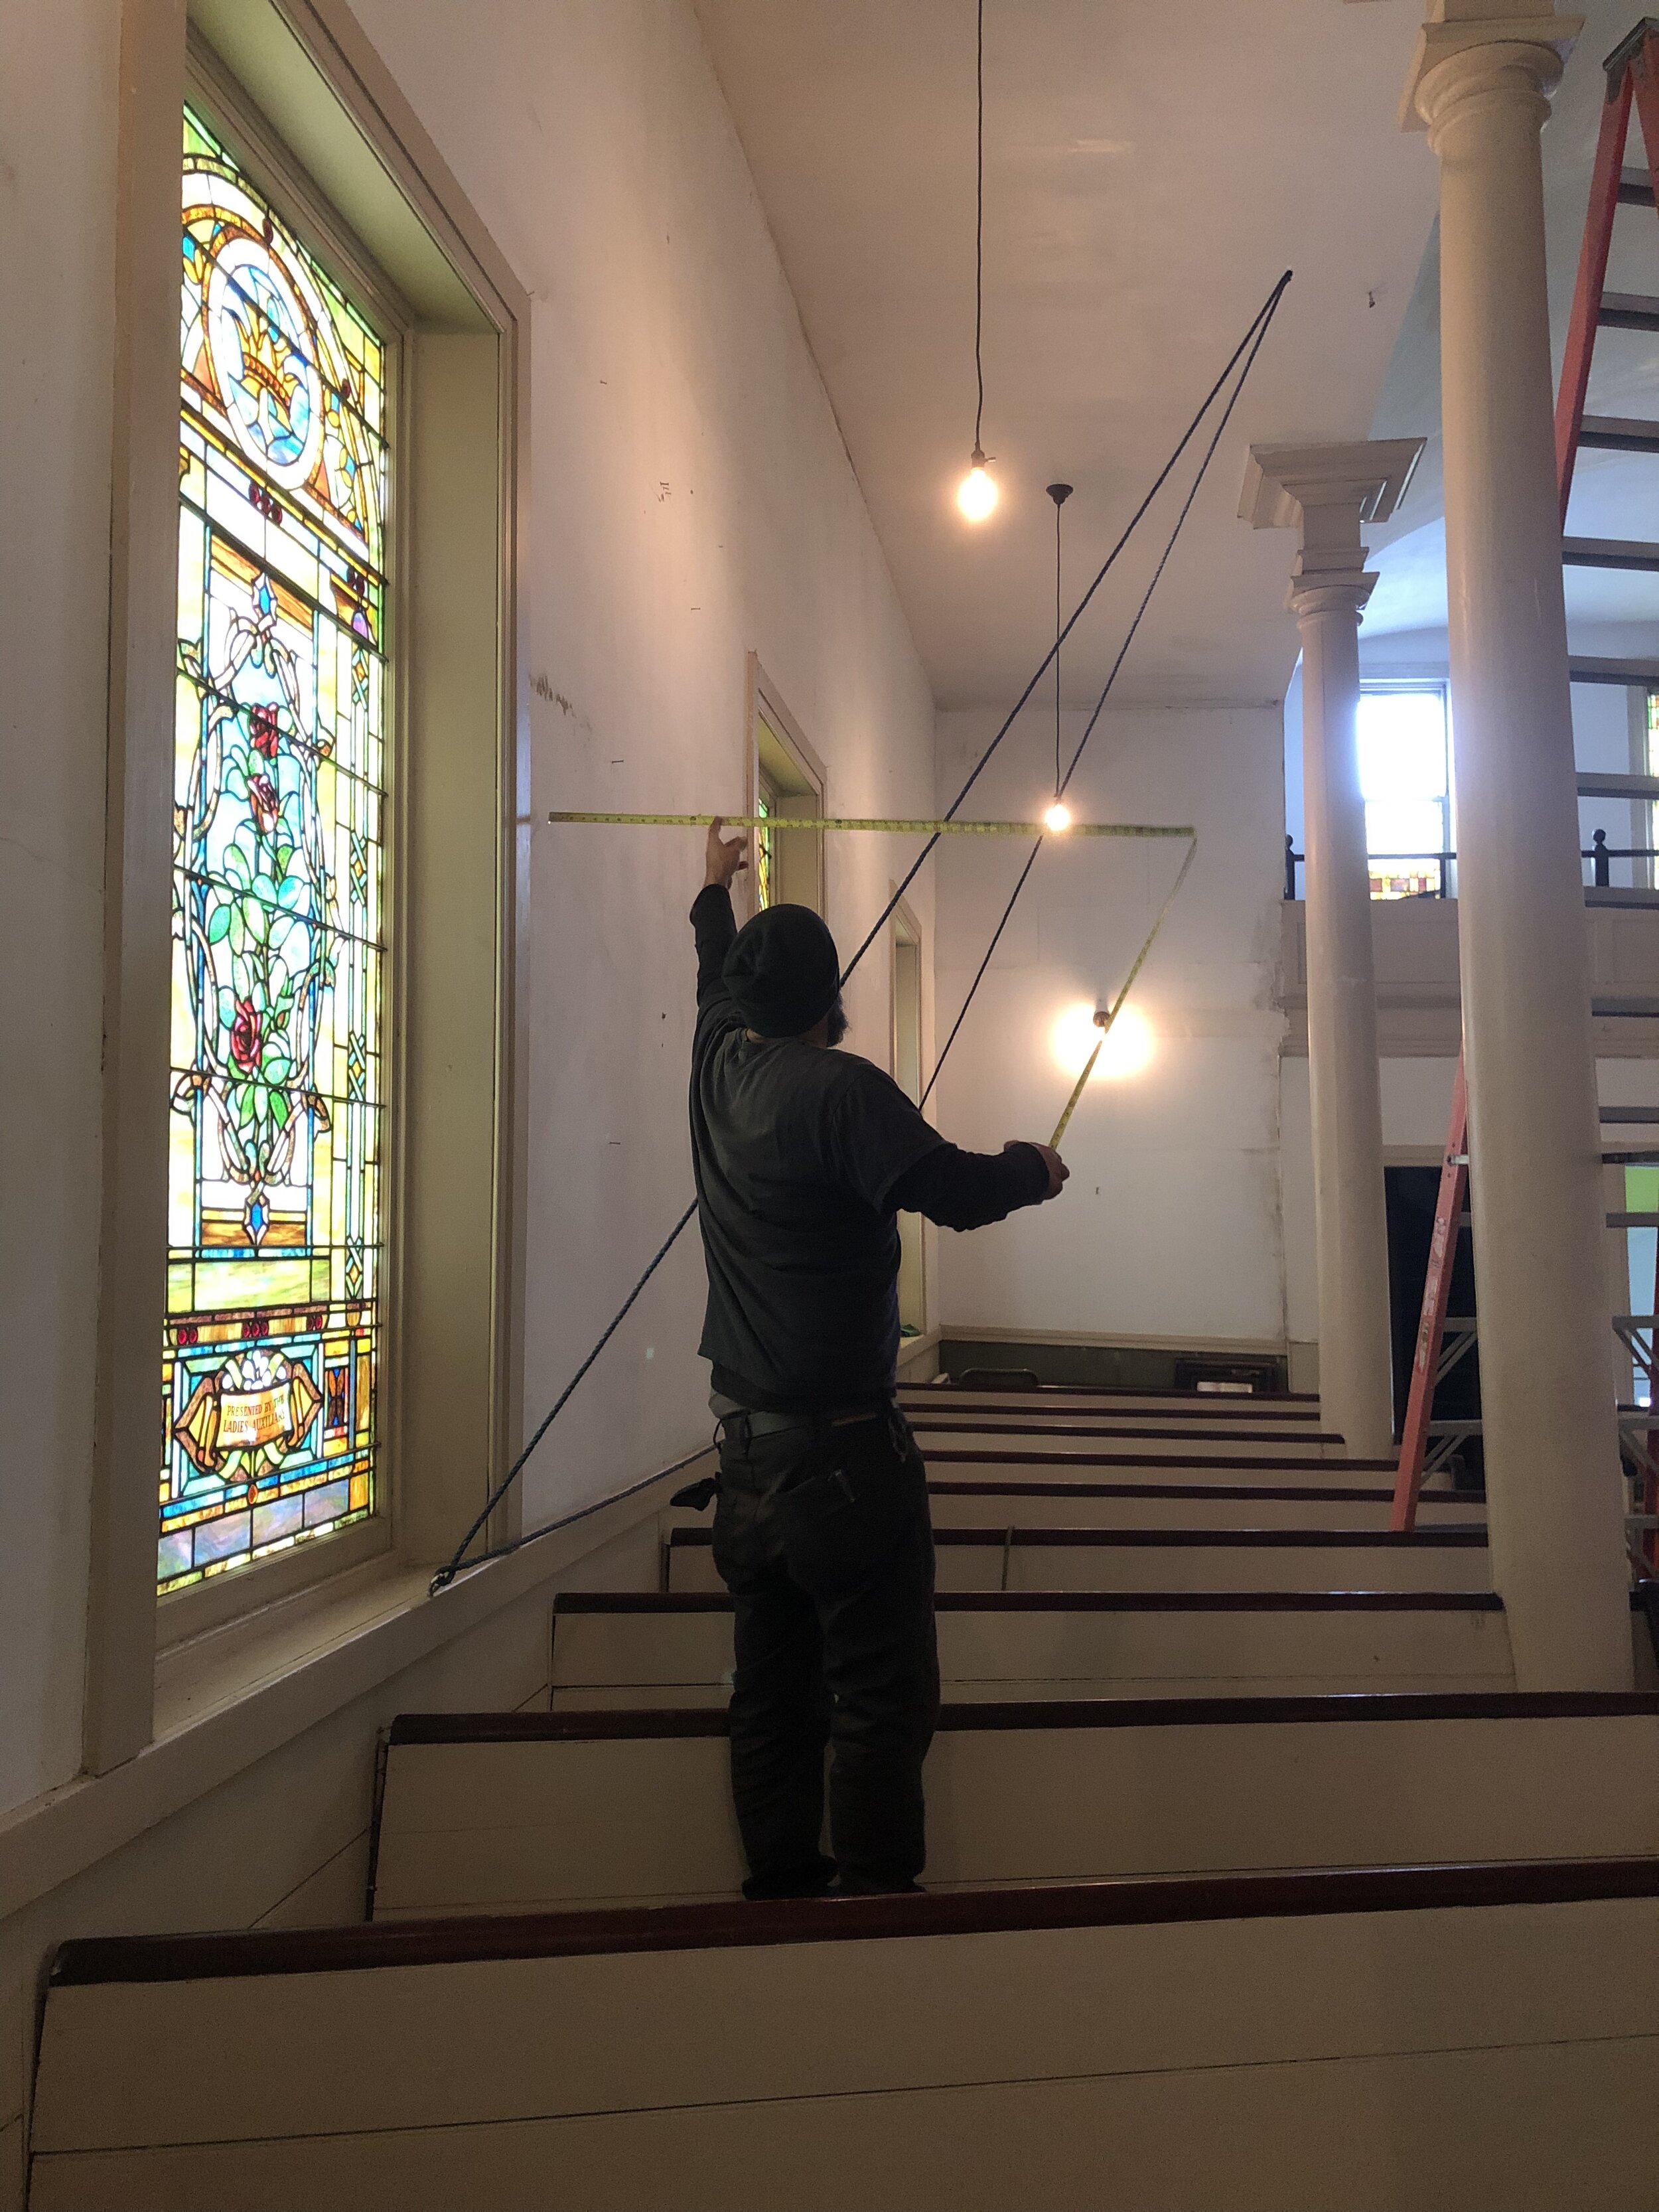   Working within the framework of the church’s space: the vaulted ceilings, pillars and columns, and inspired by stained glass windows and their designs and colors, five principle geometric forms were constructed.   